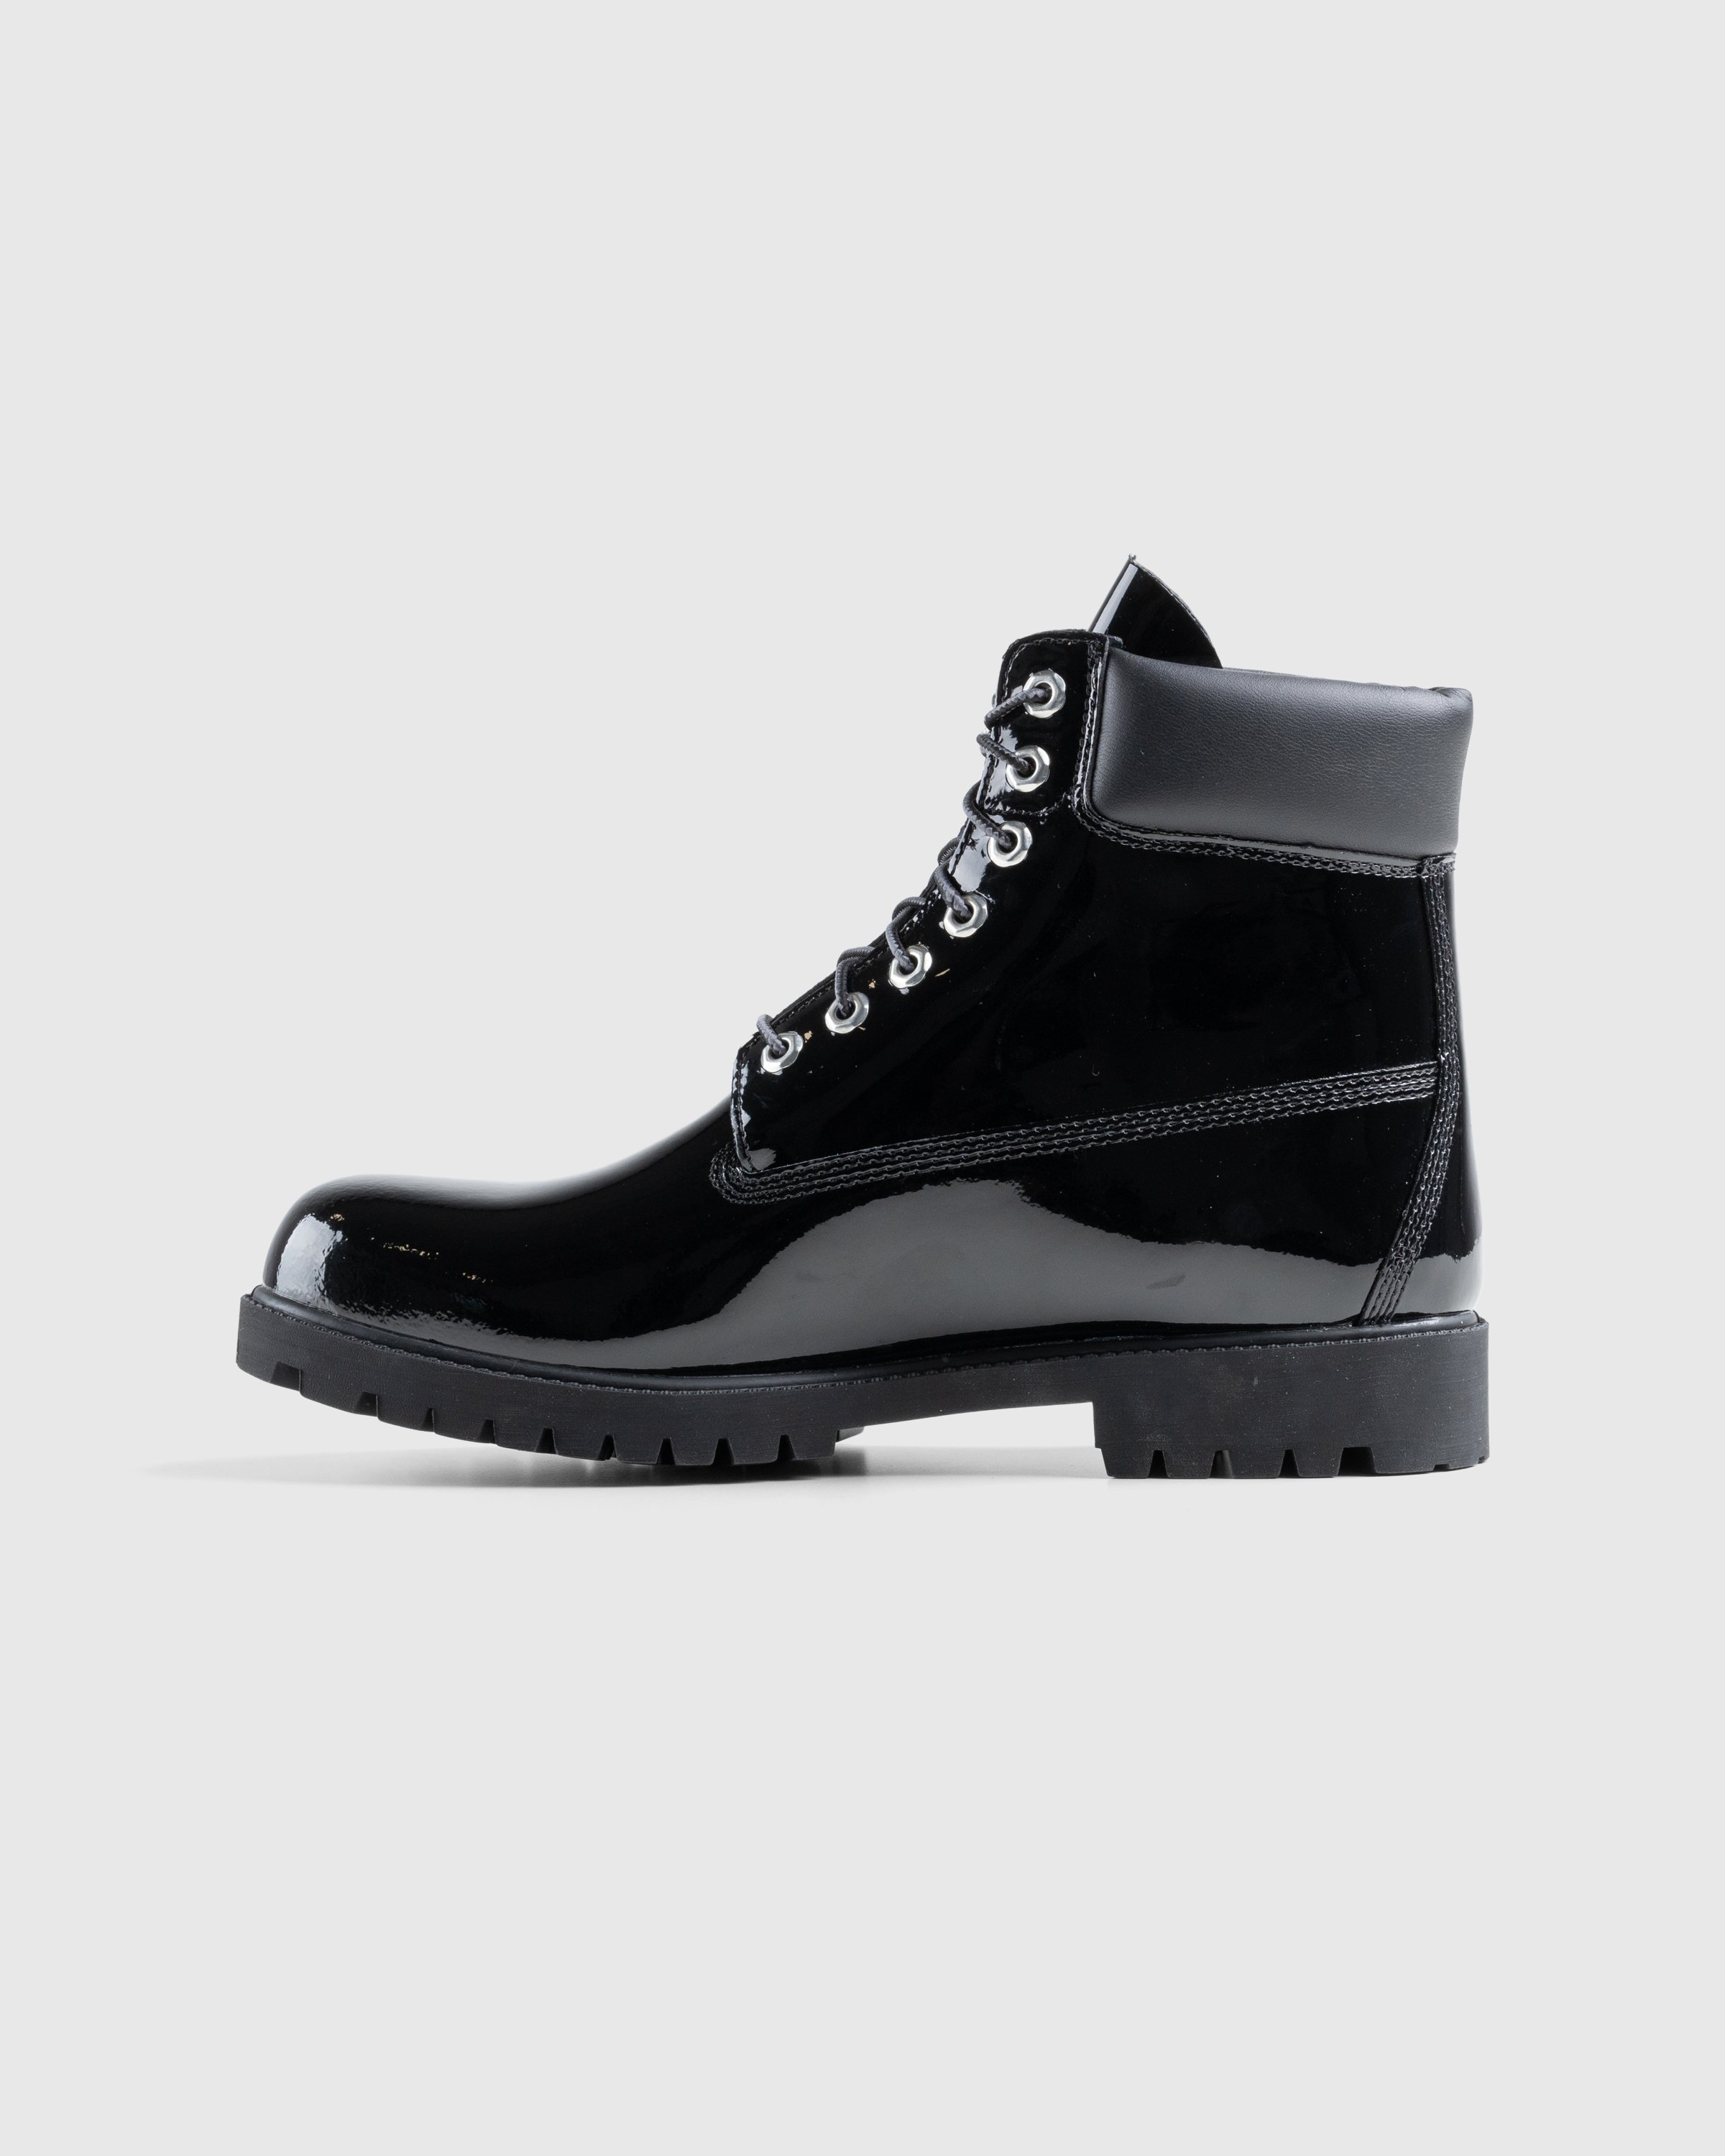 Veneda Carter x Timberland - Timberland Heritage 6 INCH LACE UP WATERPROOF BOOT BLACK PATENT LEATHER - Footwear - Black - Image 2